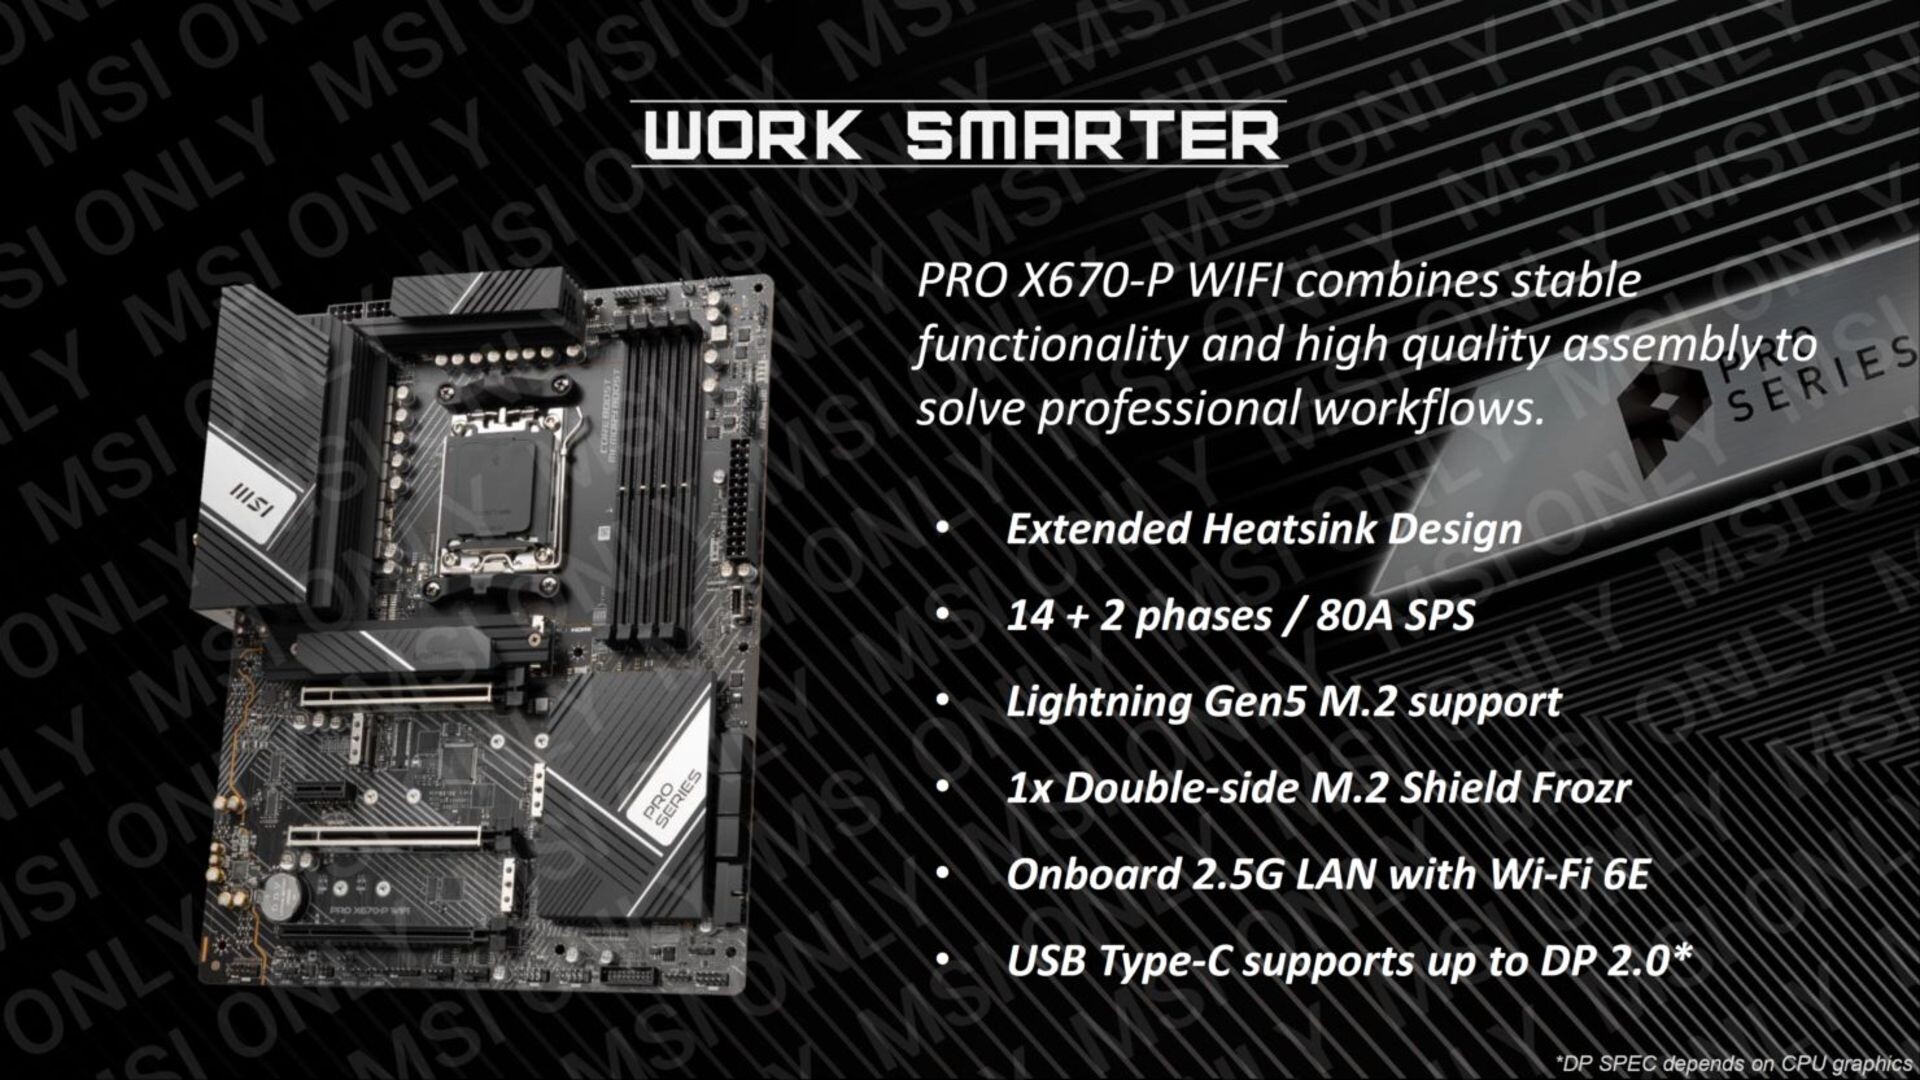 MSI Next Generation AM4 Motherboard. Rise Back To Glory.